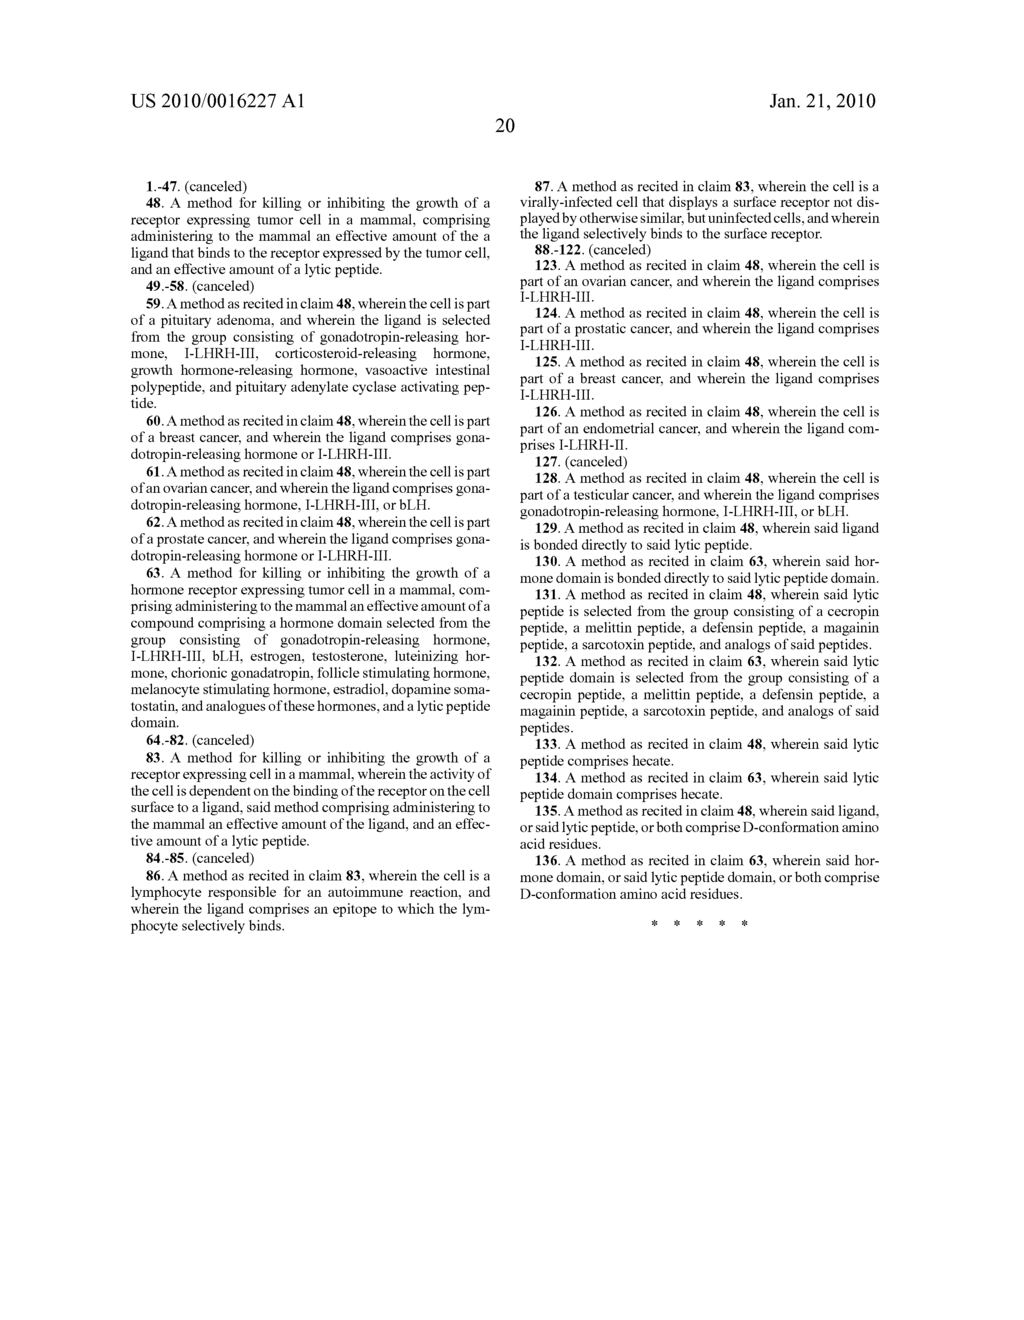 LIGAND/LYTIC PEPTIDE COMPOSITIONS AND METHODS OF USE - diagram, schematic, and image 21